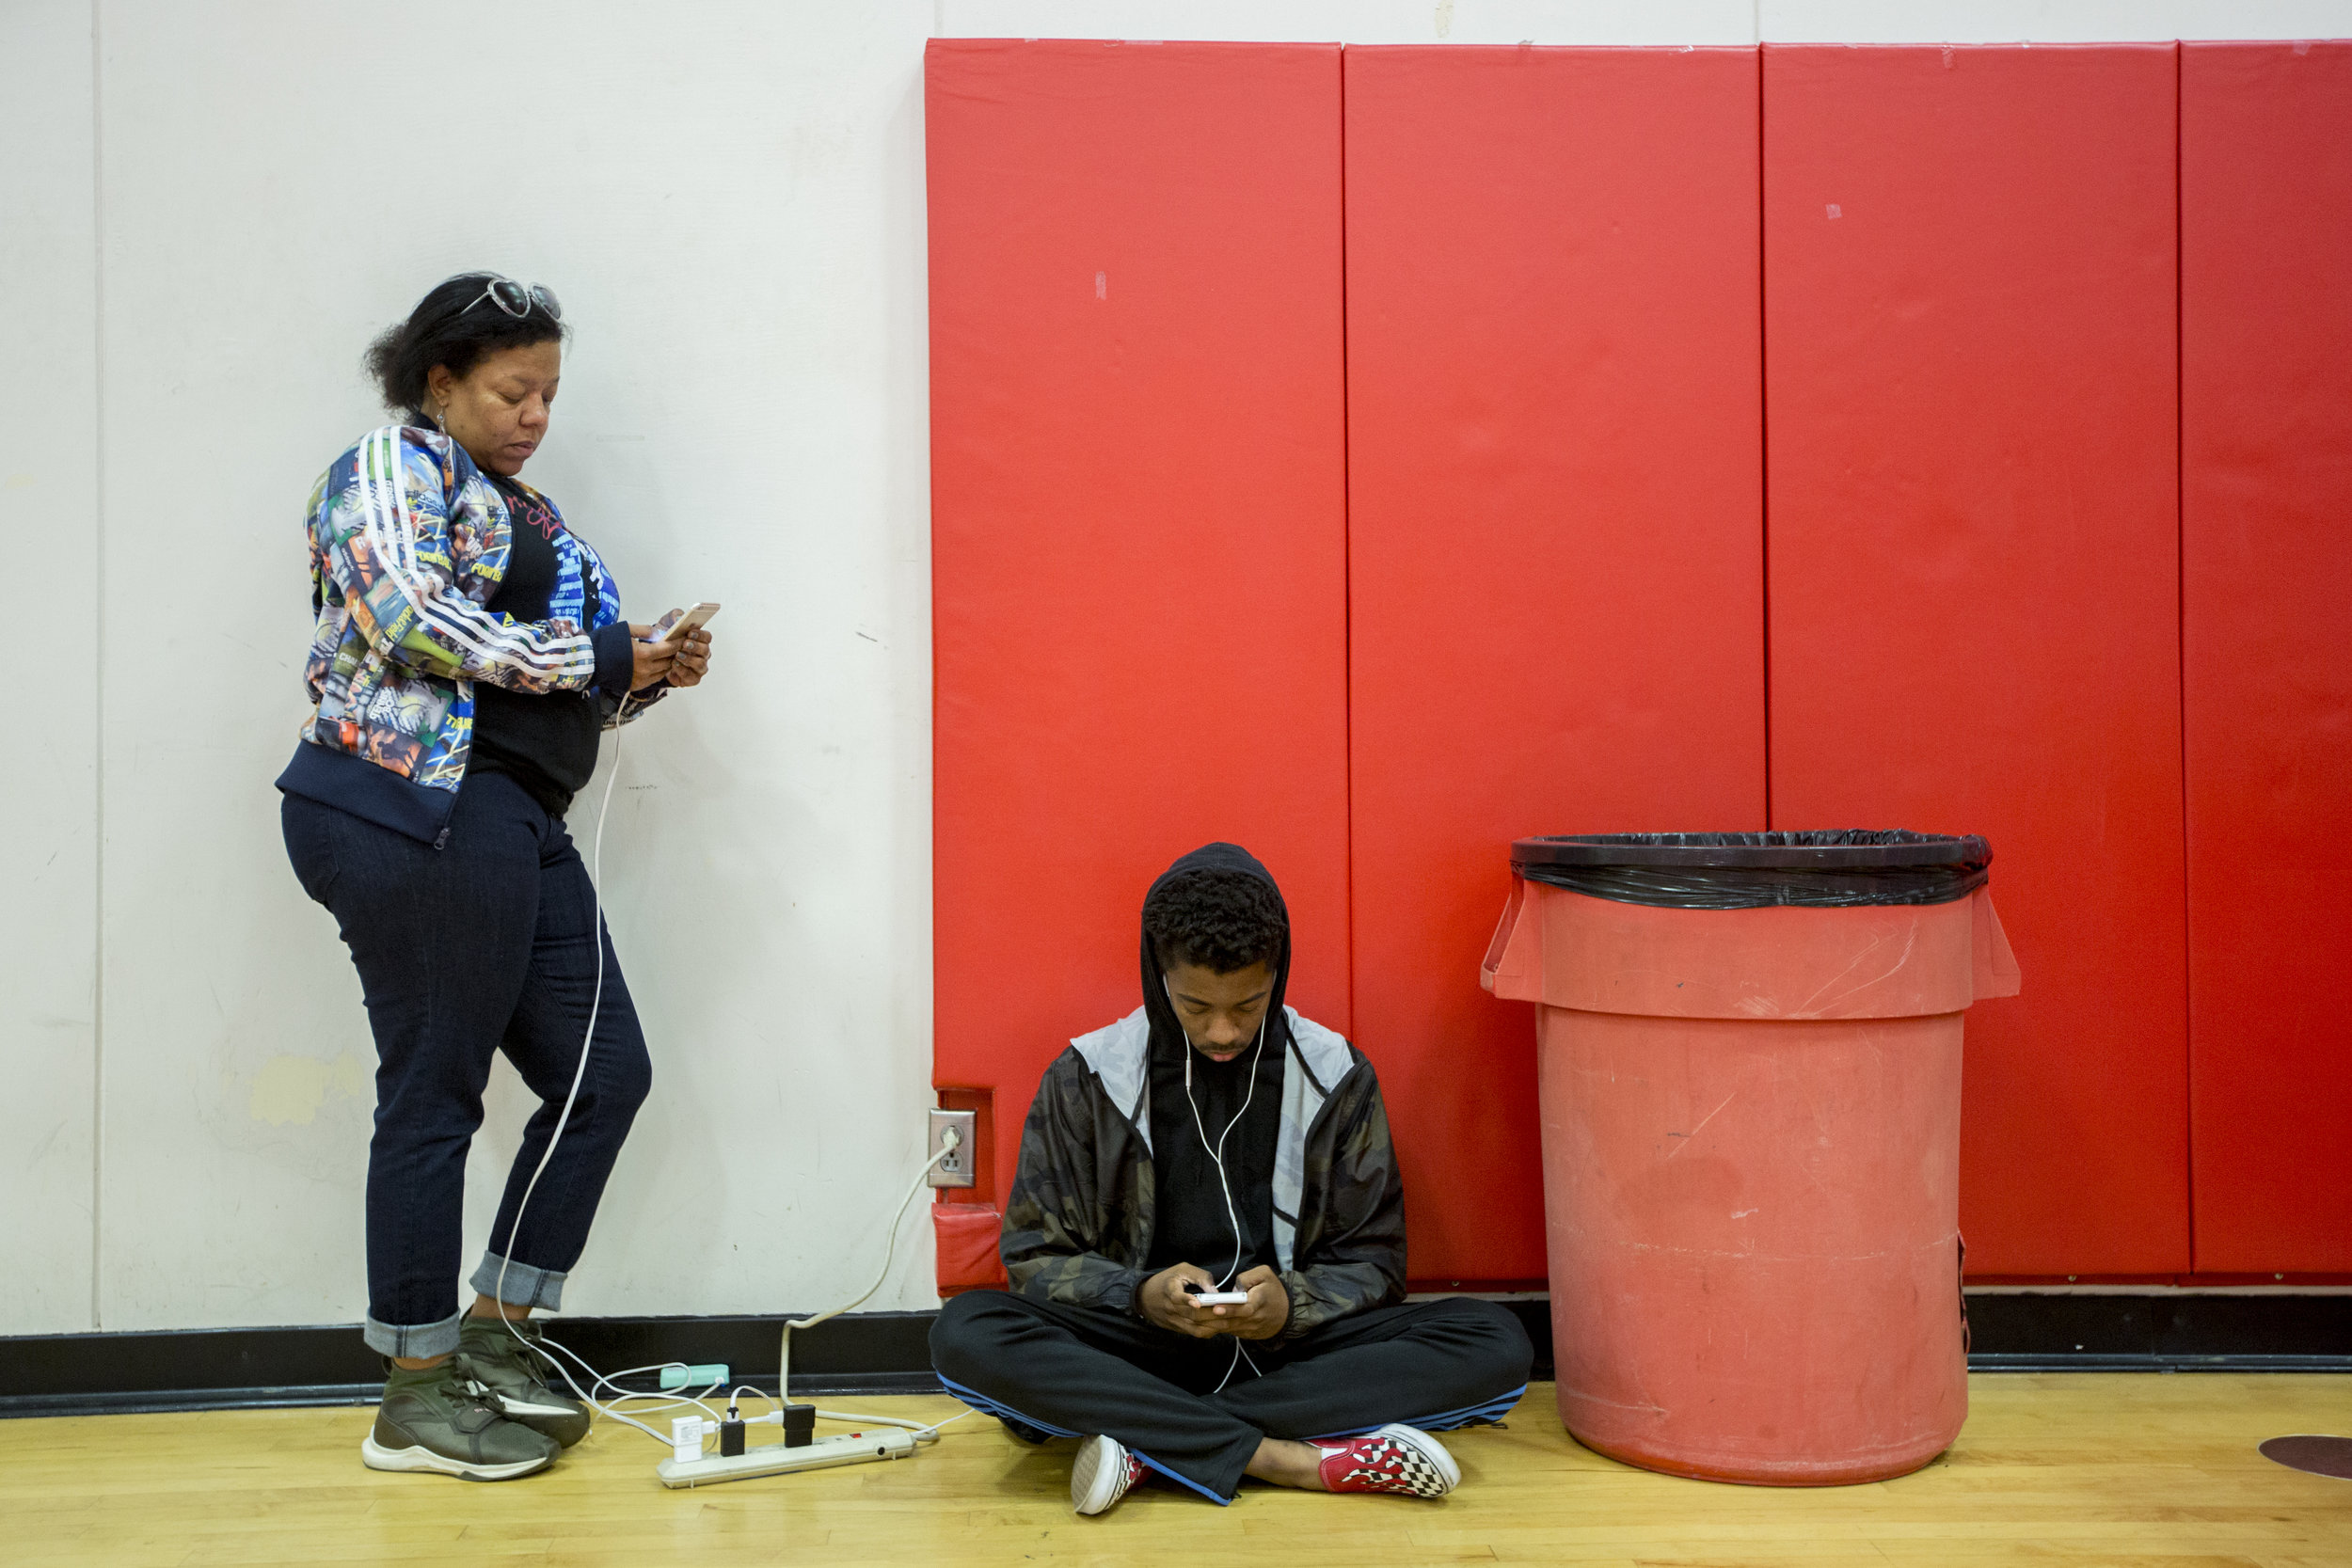  Jenyce Johnson and her son, from Thousand Oaks, charge their phones and stay connected at the Woolsey fire evacuation center set up at Los Angeles Pierce College on November 9, 2018 in Woodland Hills, Calif. Already shaken by the Borderline Bar &amp